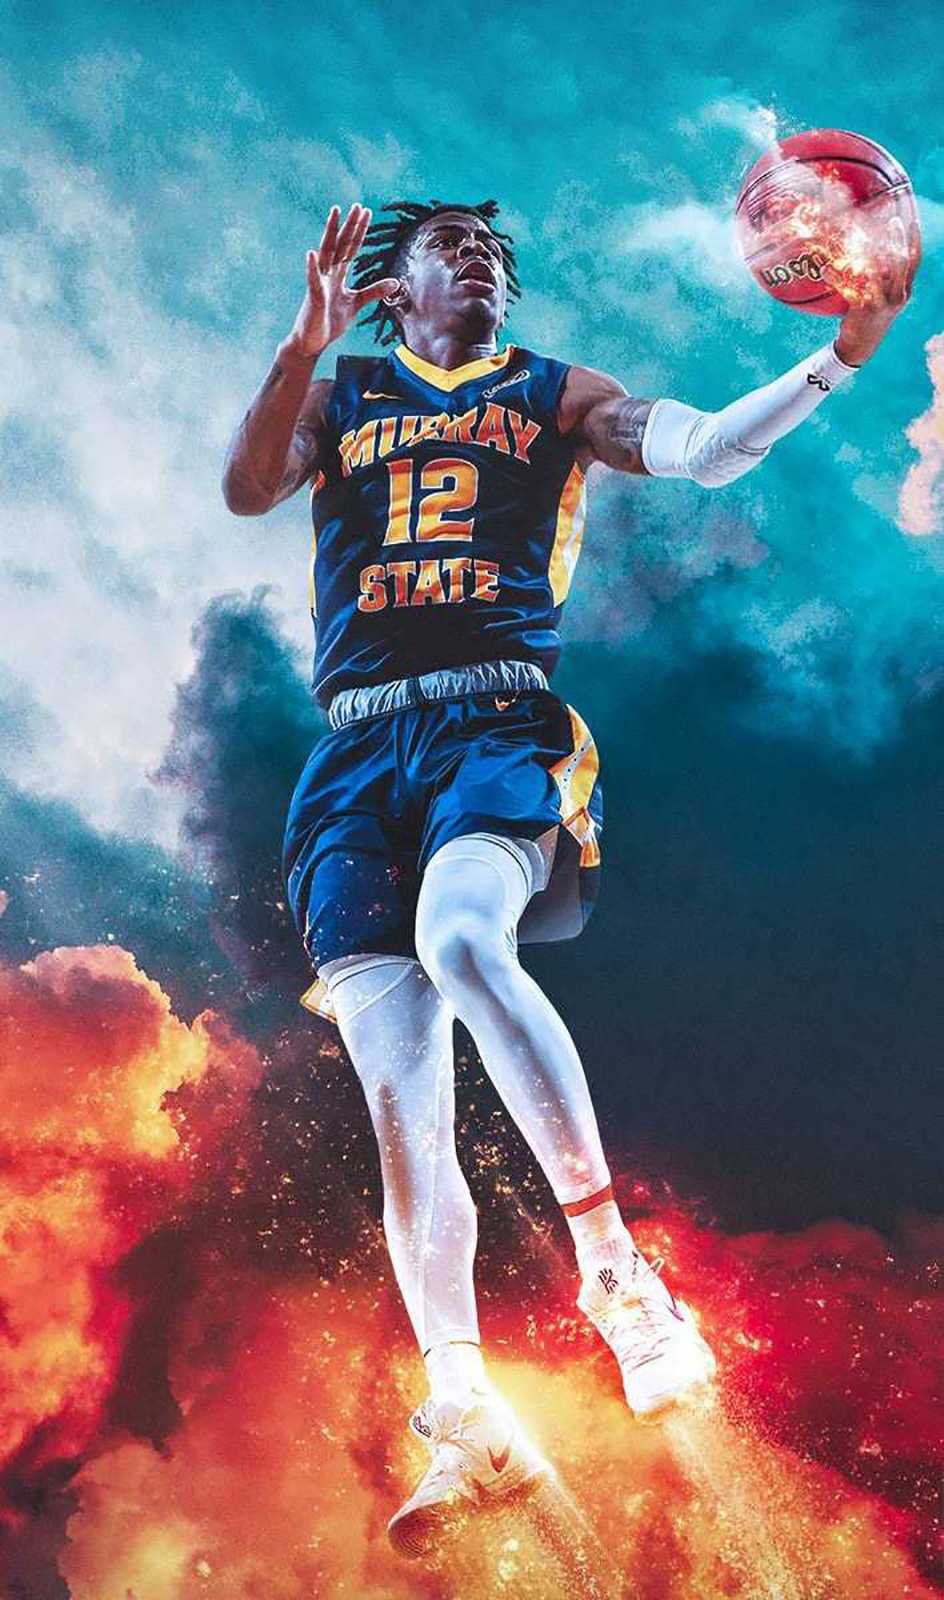 Download this wallpaper for free in HD resolution. - Ja Morant